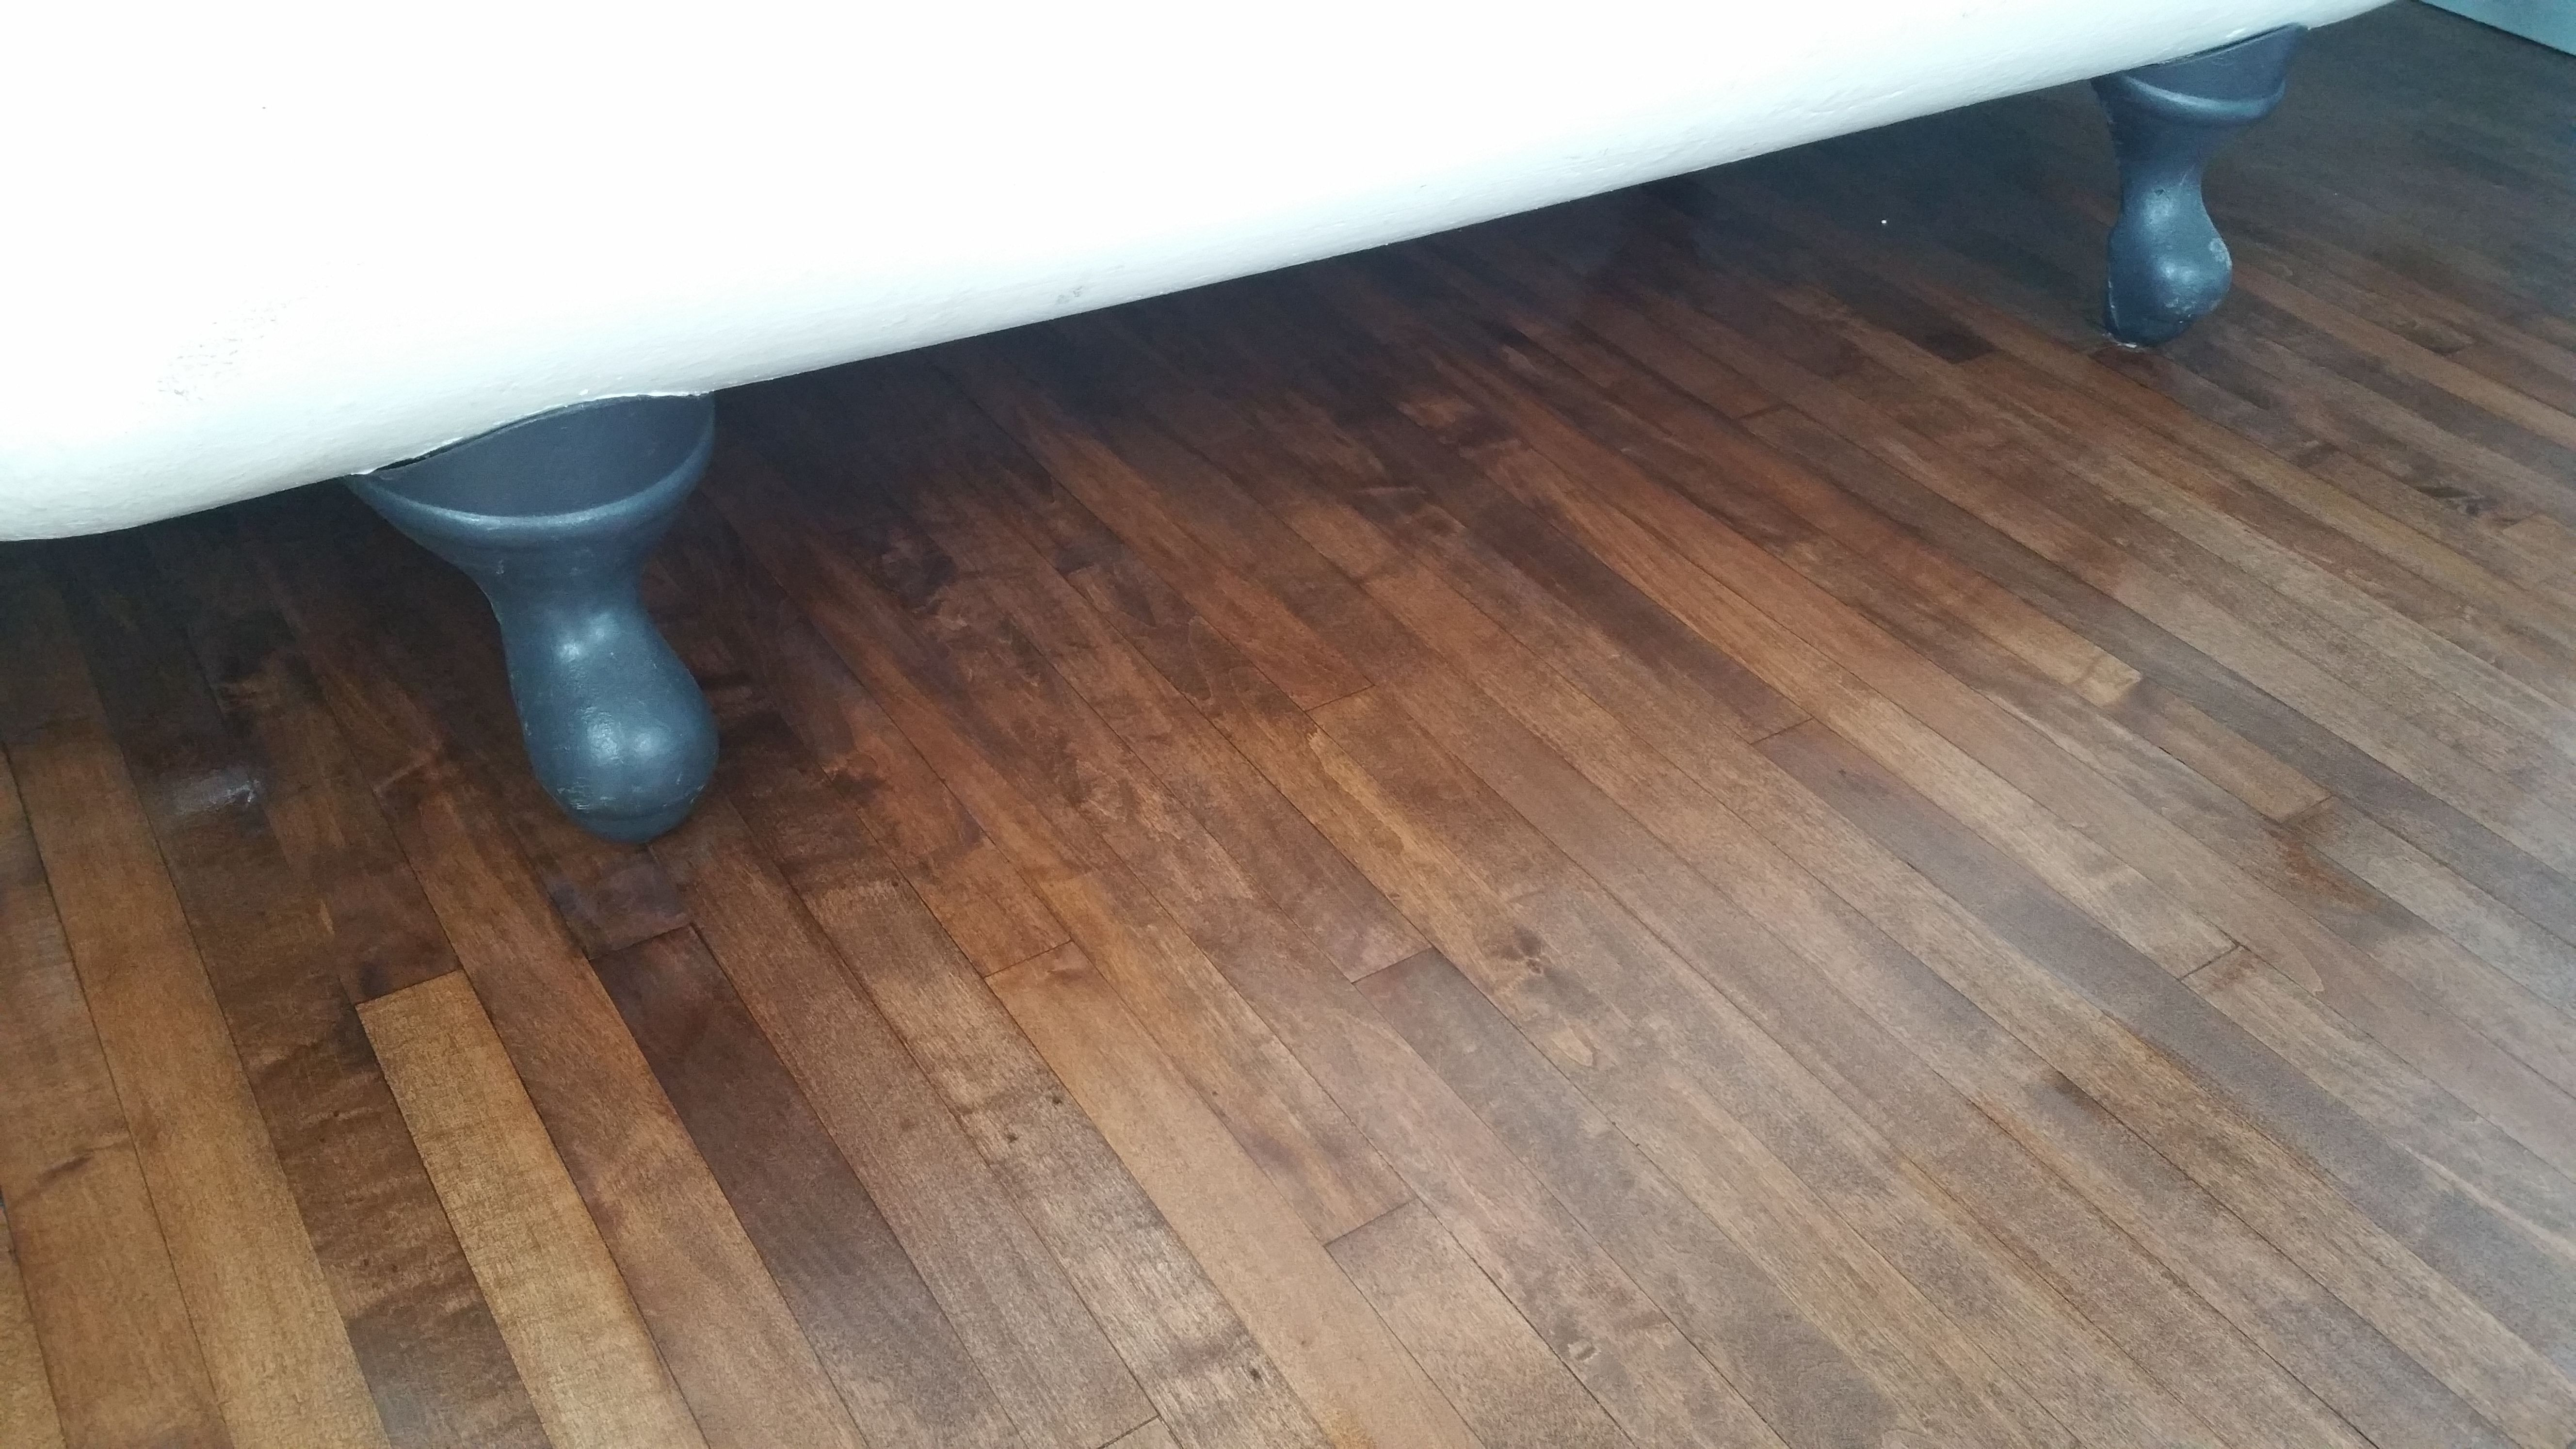 30 attractive Engineered Hardwood Flooring Calgary 2024 free download engineered hardwood flooring calgary of 1 1 2 maple in a 100 year old calgary home was in horrible shape for 1 1 2 maple in a 100 year old calgary home was in horrible shape but sanded up an